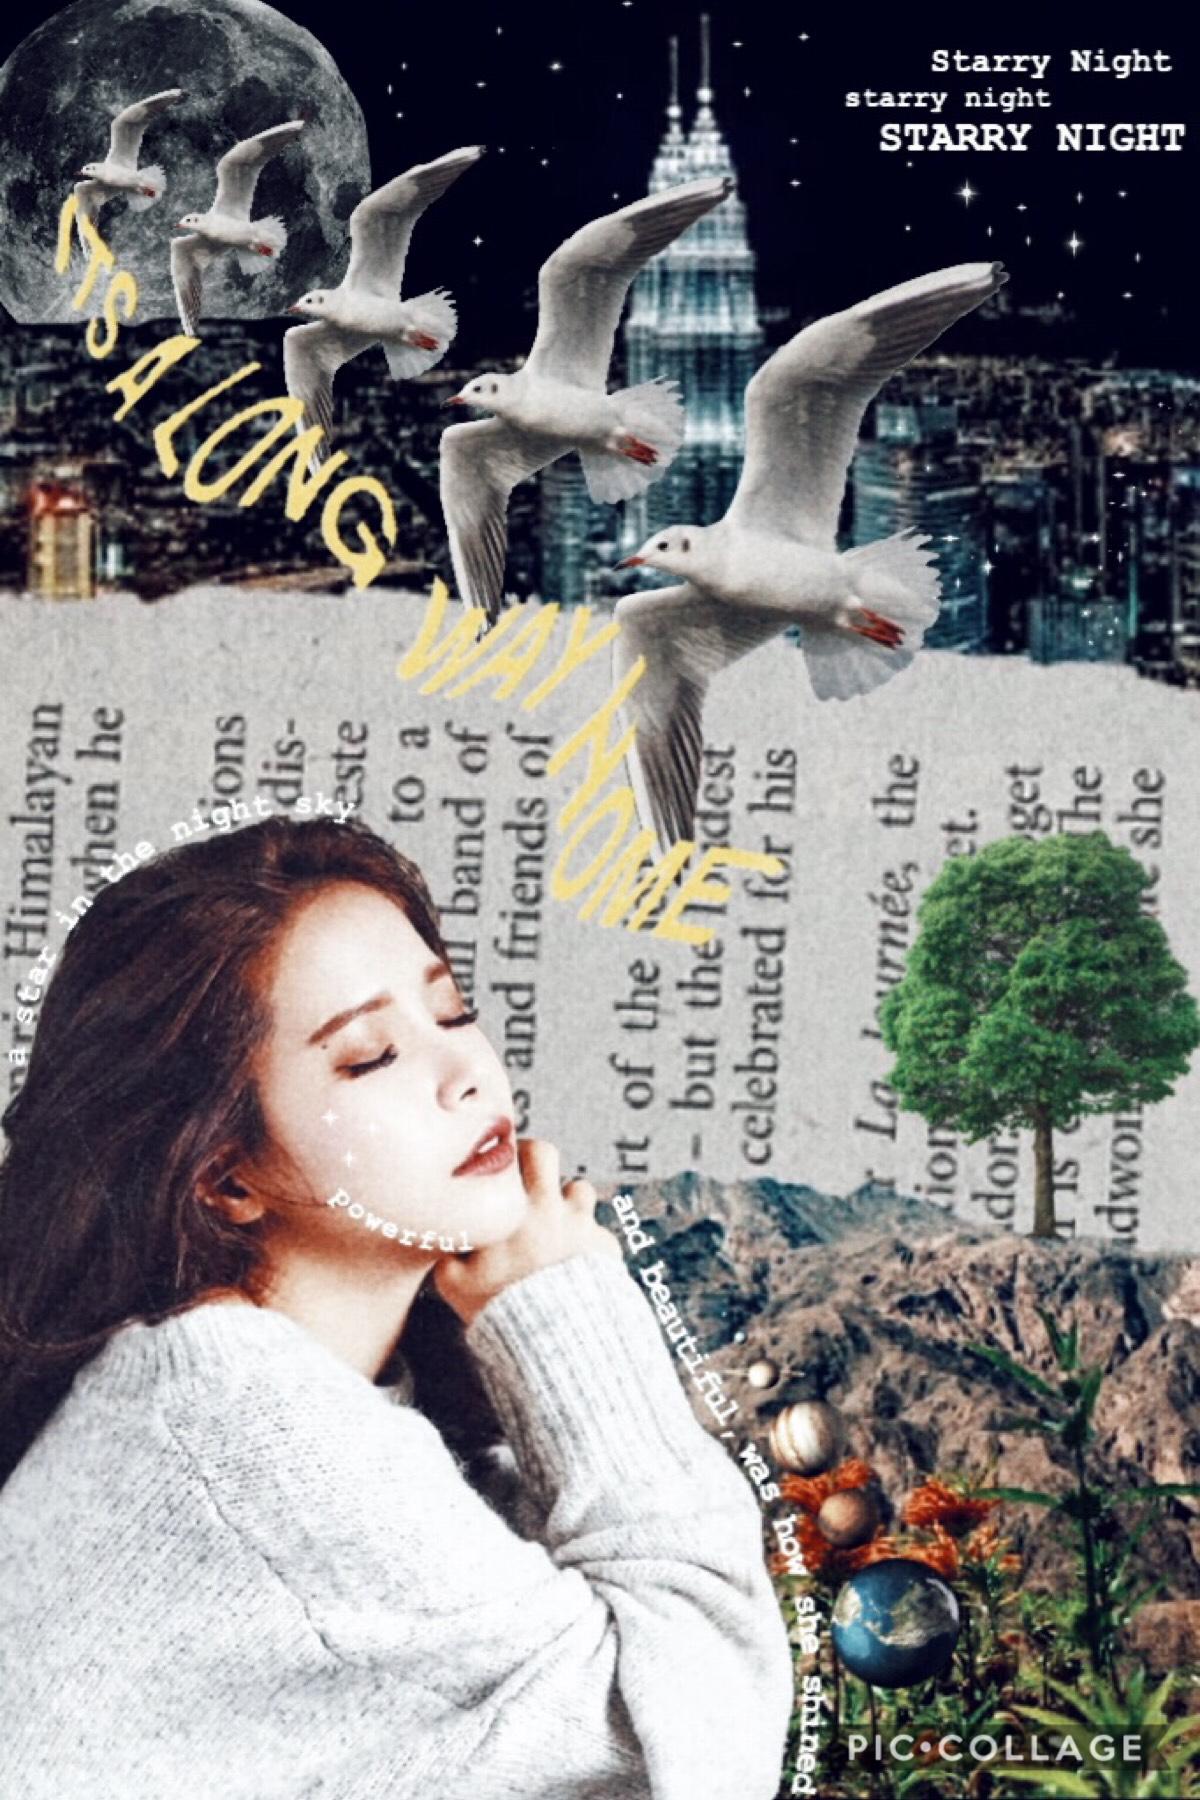 ☆sᴛᴇᴘ ᴏᴜᴛ☆
•••

collab with...🌿
the amazing, beautiful, talented...
✨@vibes_086✨
they r such an incredible person and editor so please go and give them some love<333

Solar Mamamoo
(yes i do listen to girl groups)🤨